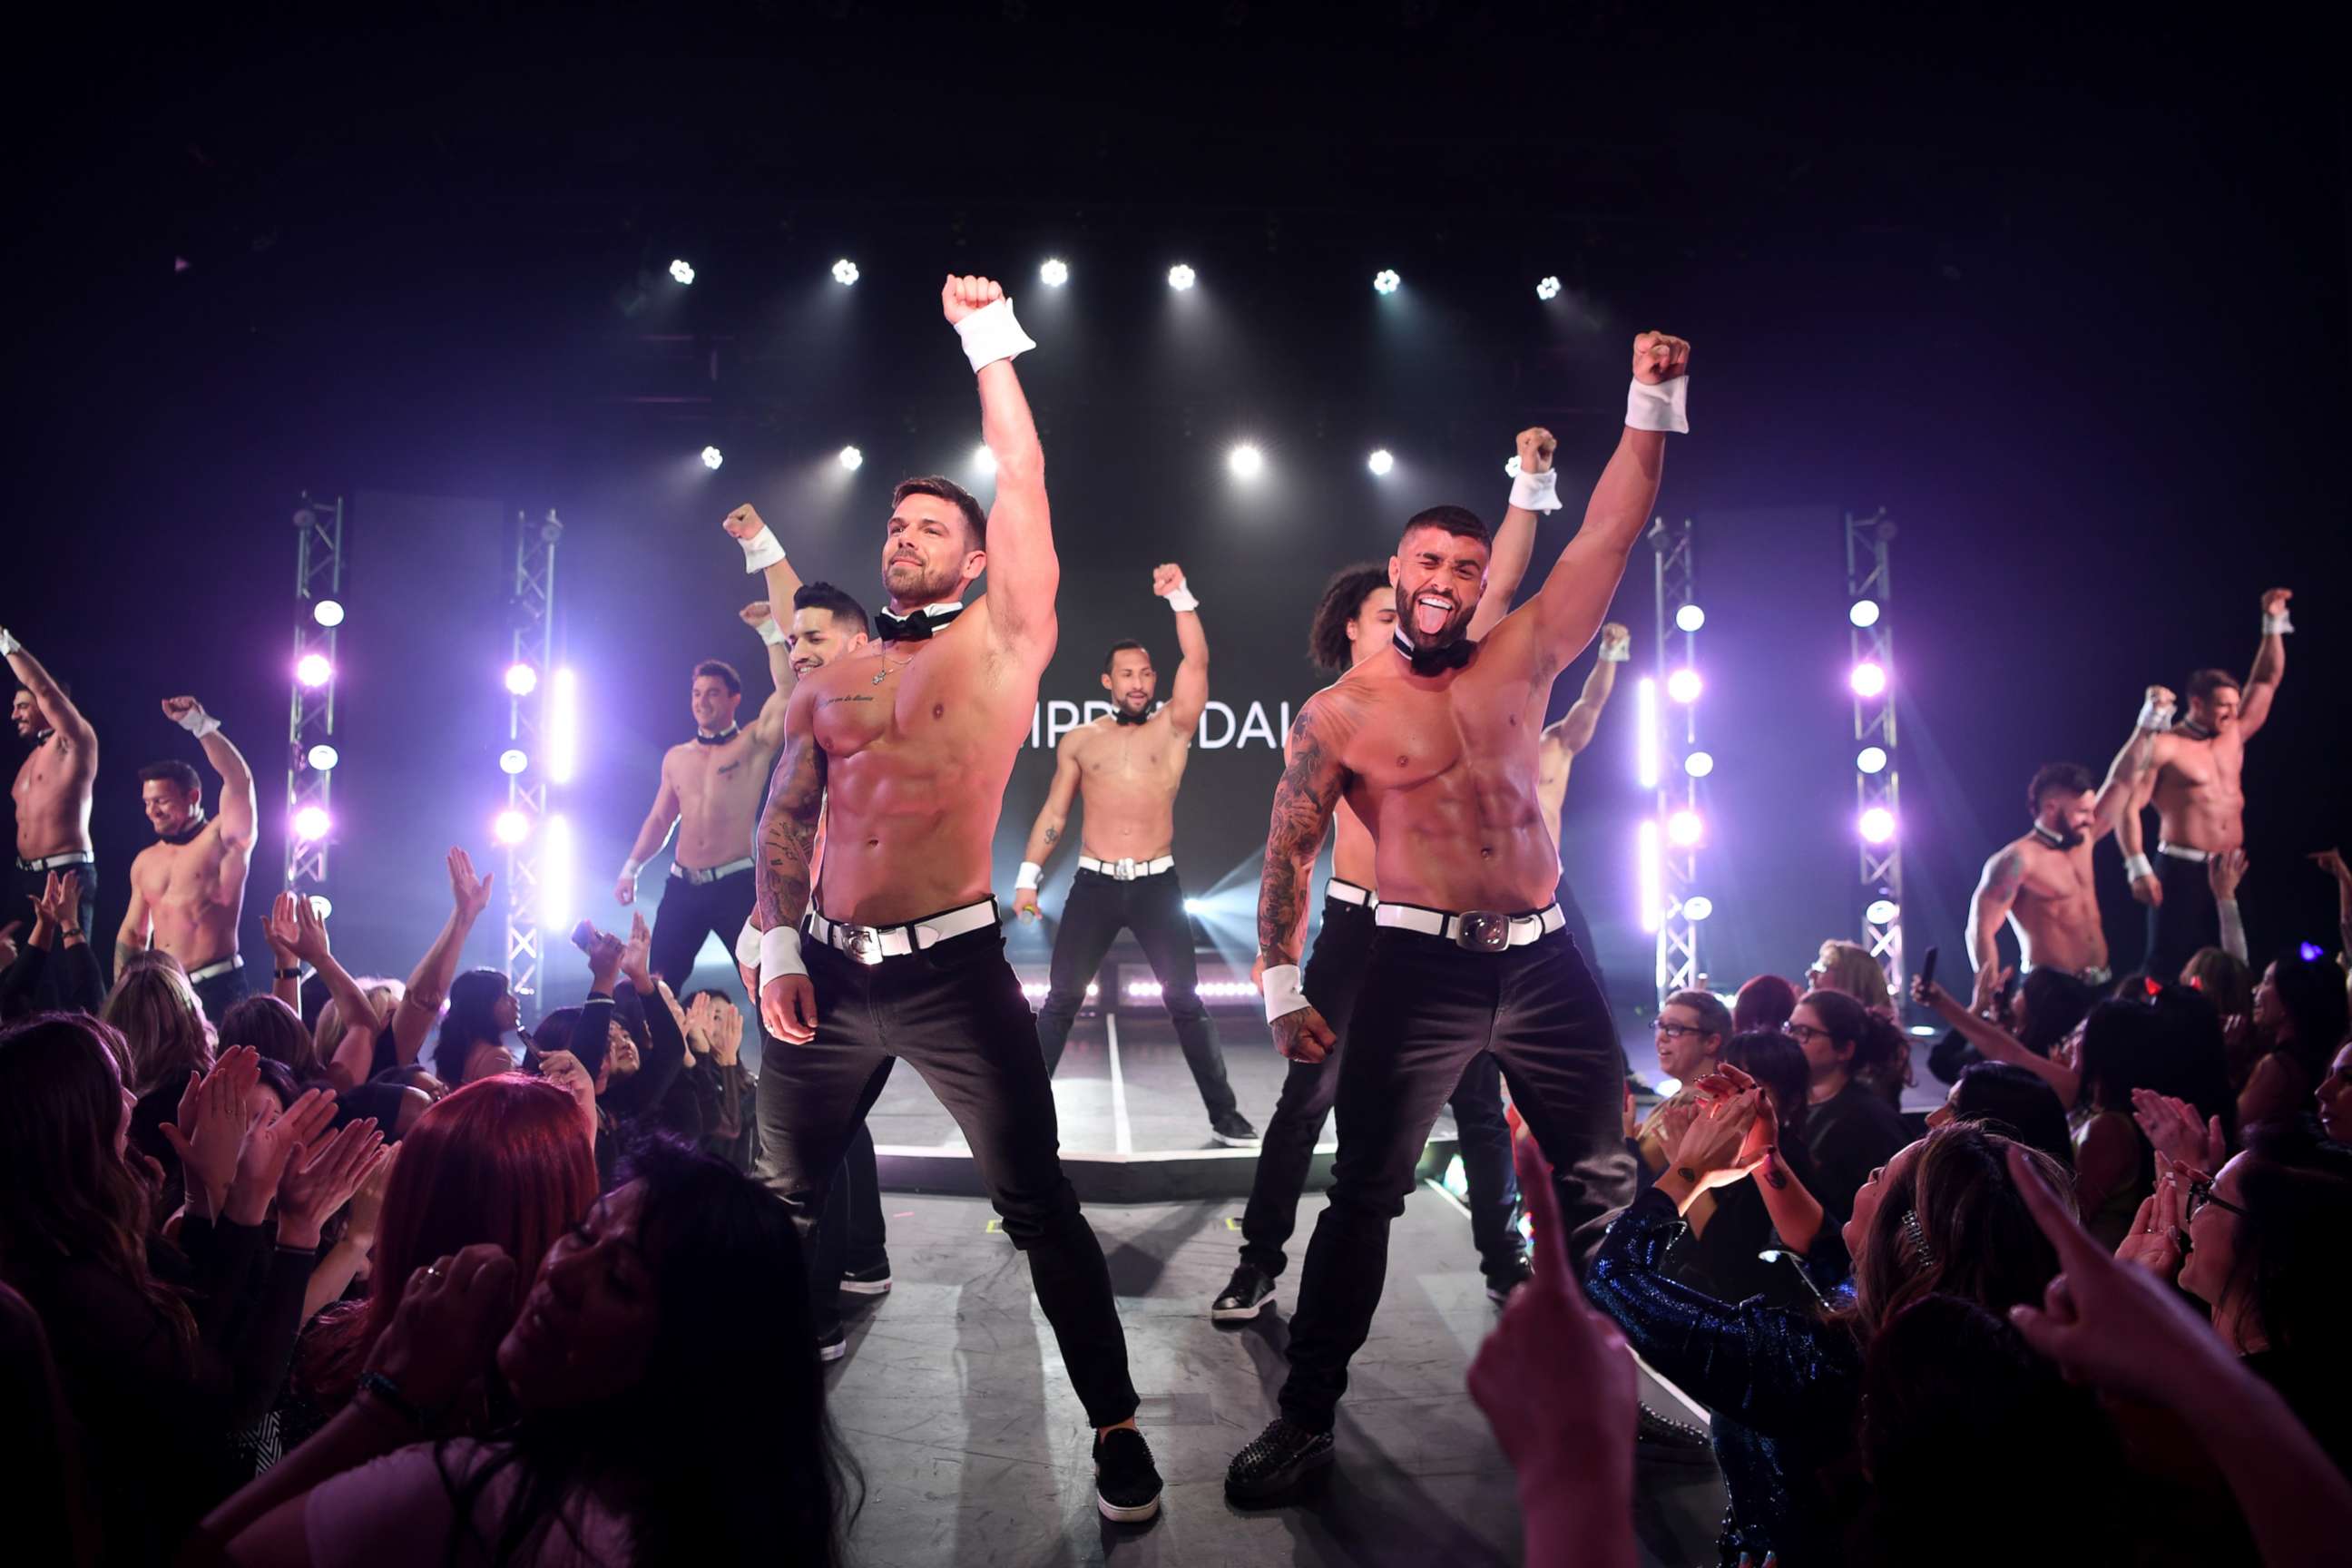 PHOTO: In this Jan. 24, 2020, file photo, MTV's Joss Mooney and Rogan O'Connor perform at Chippendales at Rio All-Suite Hotel &amp; Casino in Las Vegas.